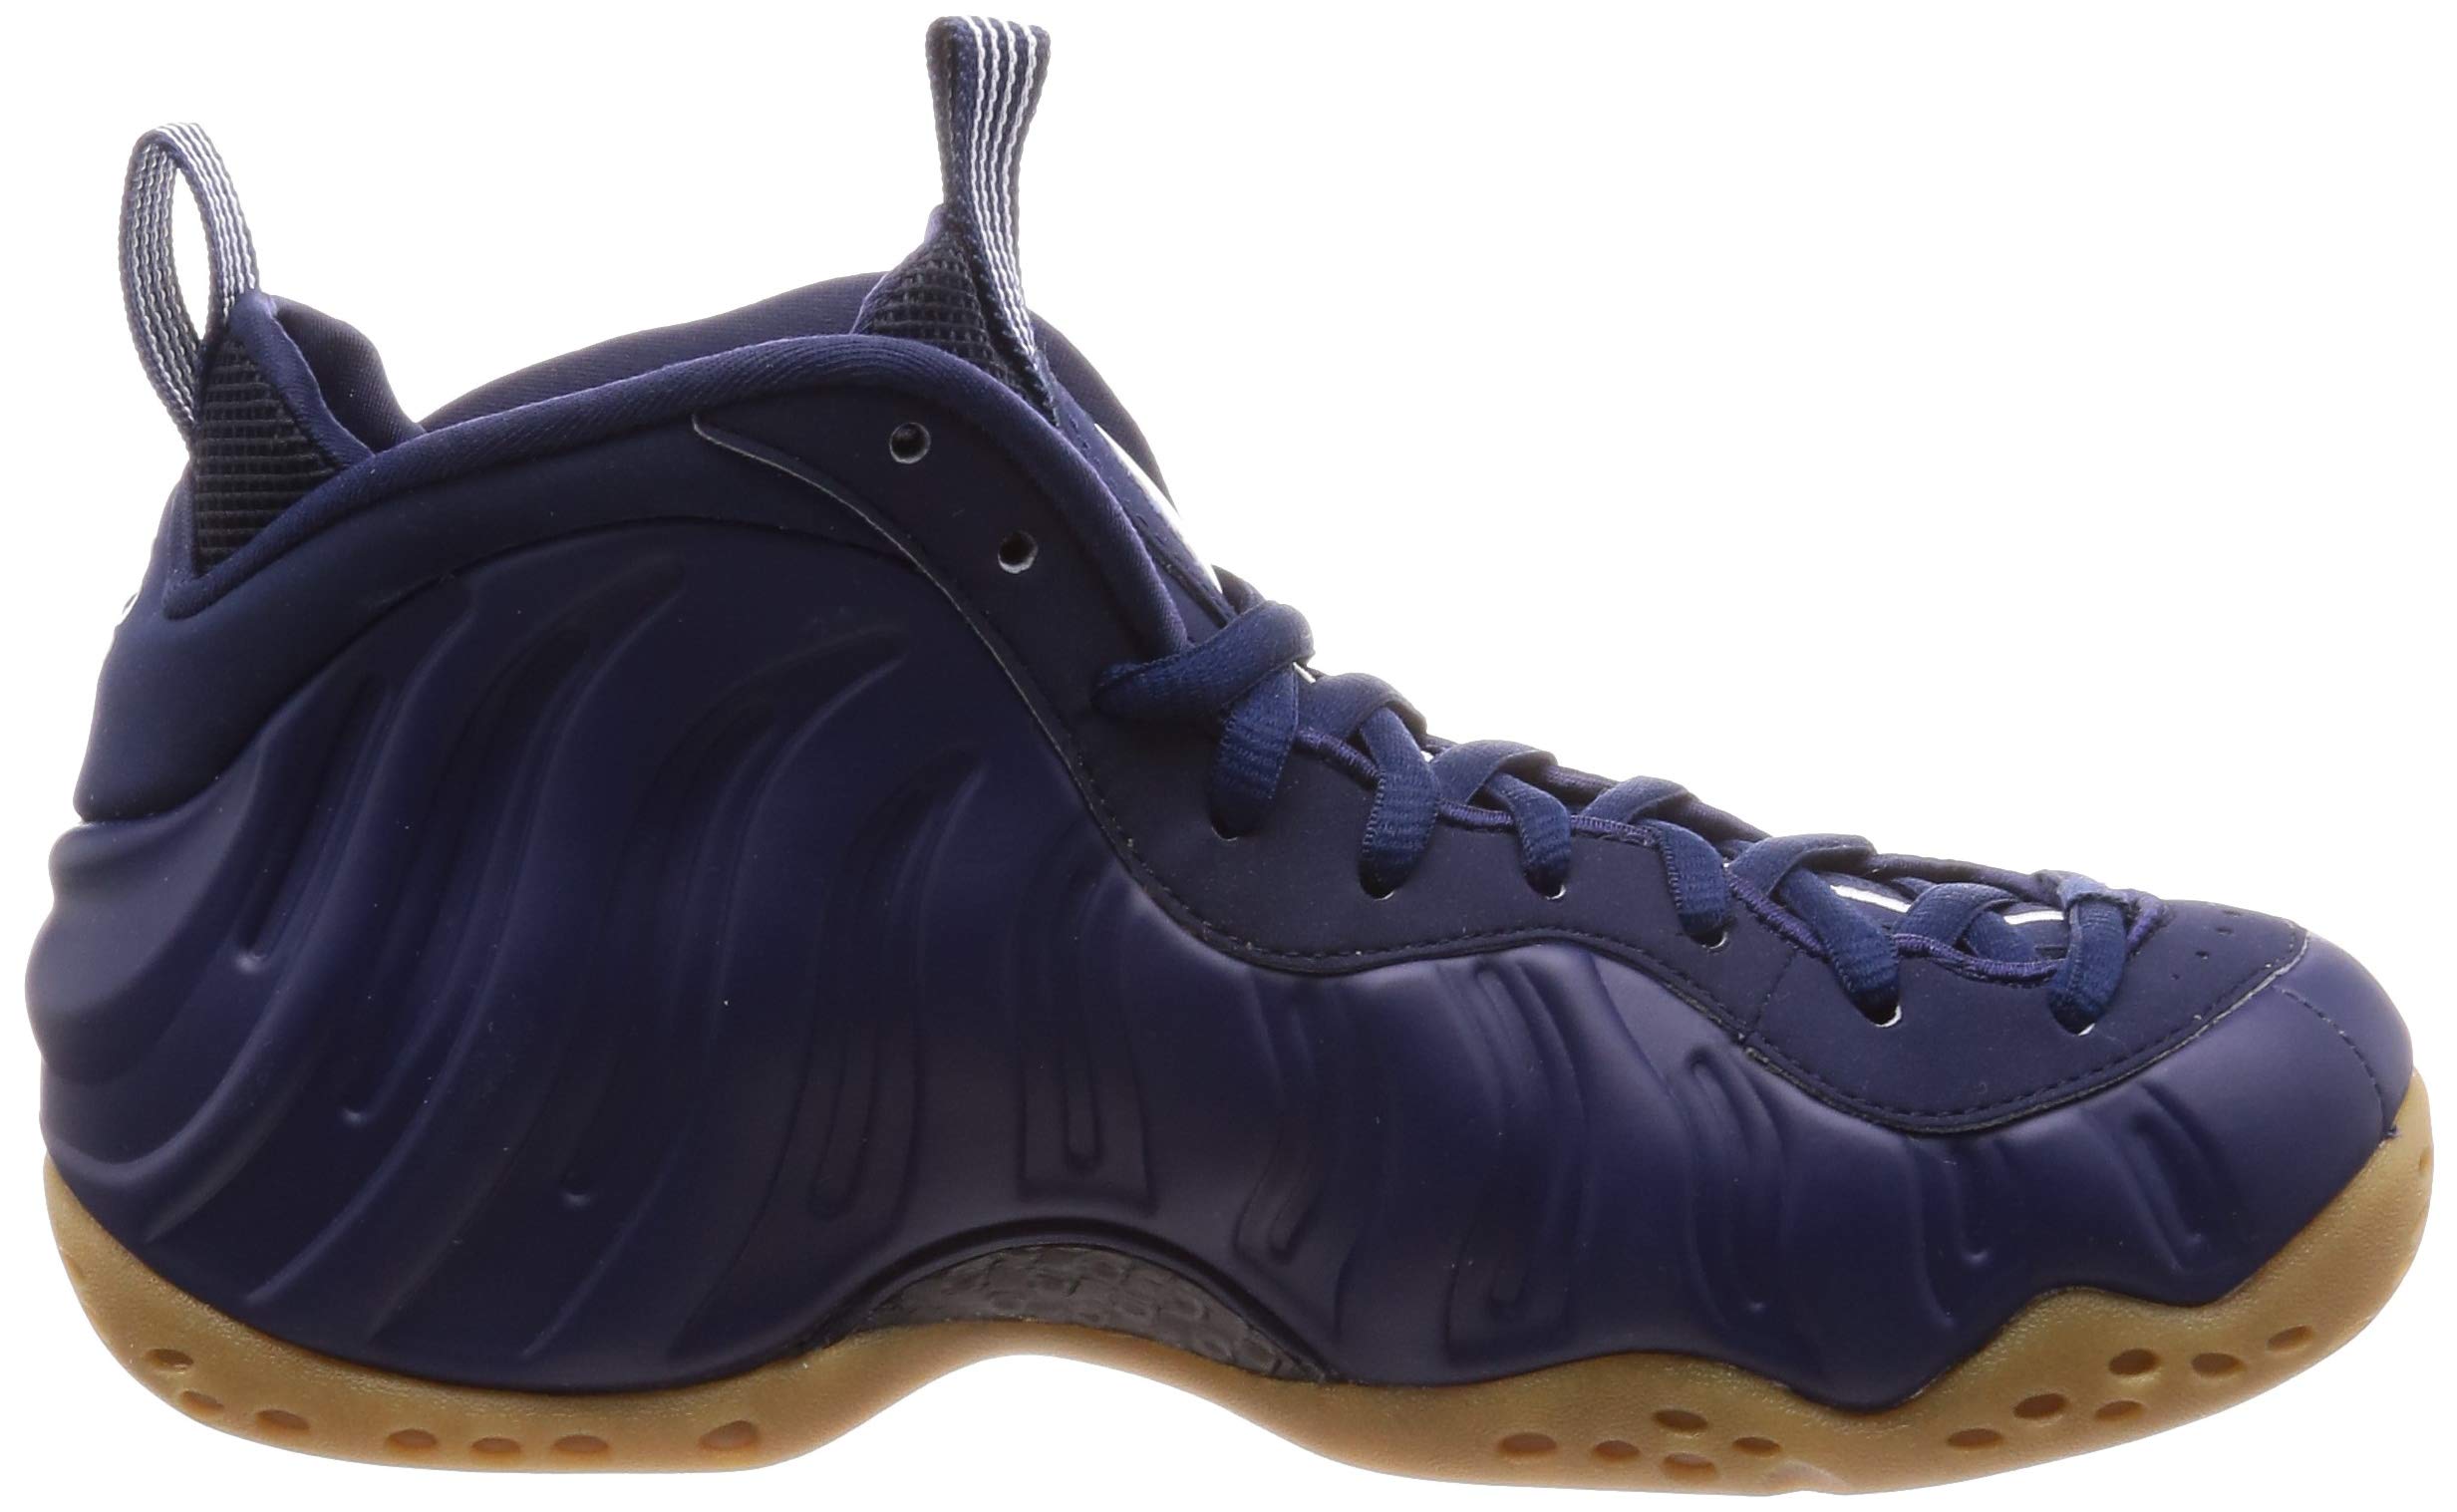 Nike Mens Air Foamposite One Basketball Shoe (9) - image 1 of 5